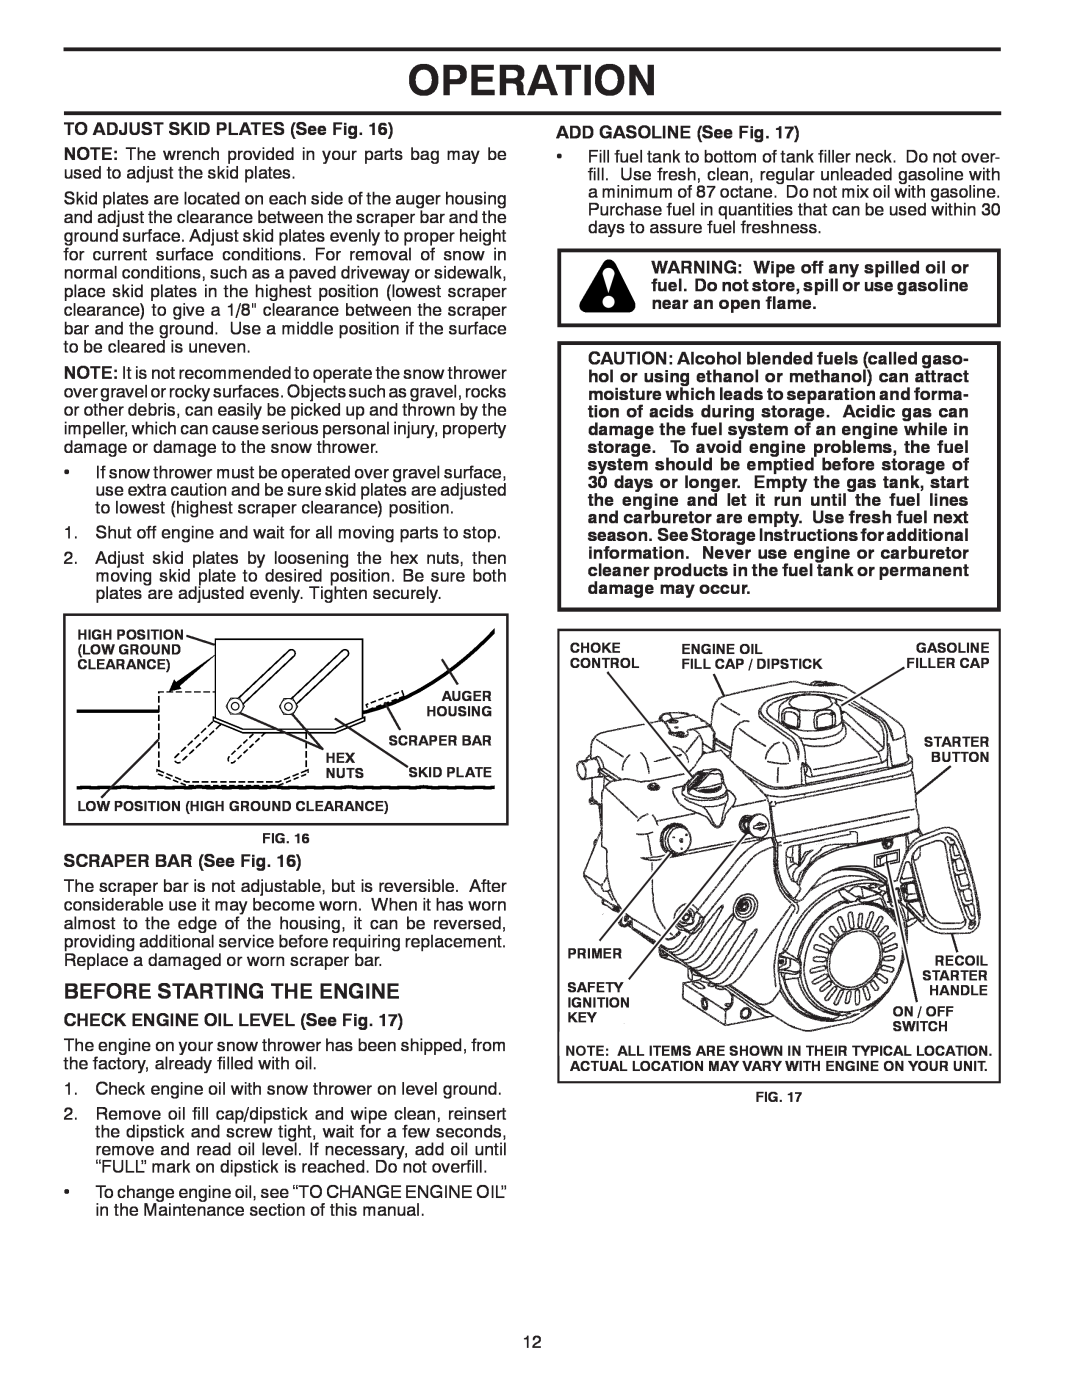 Poulan 428695, 96192003001 Before Starting The Engine, Operation, TO ADJUST SKID PLATES See Fig, SCRAPER BAR See Fig 